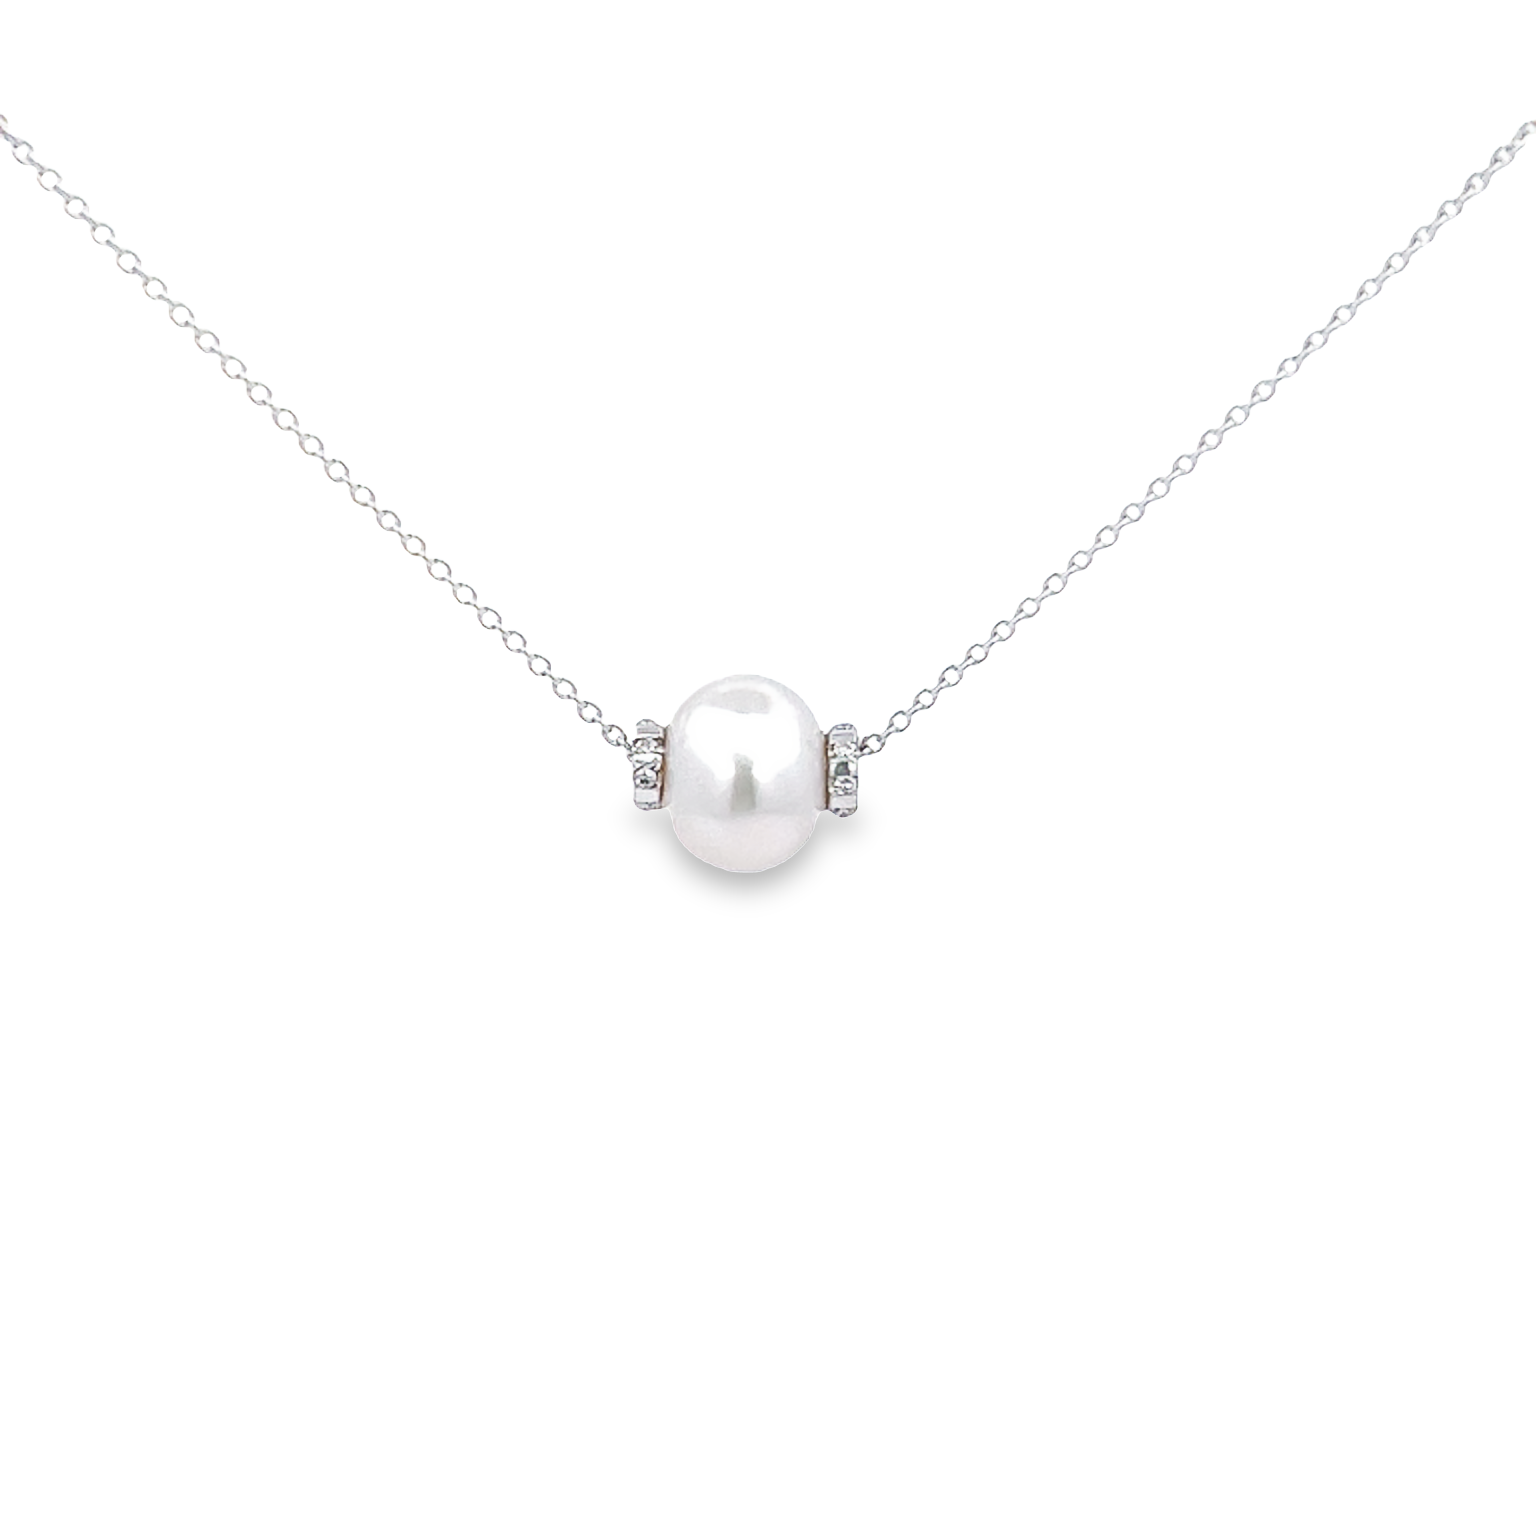 Sterling necklace with One fresh water Pearl and 16=0.06 total weight single cut Diamonds.